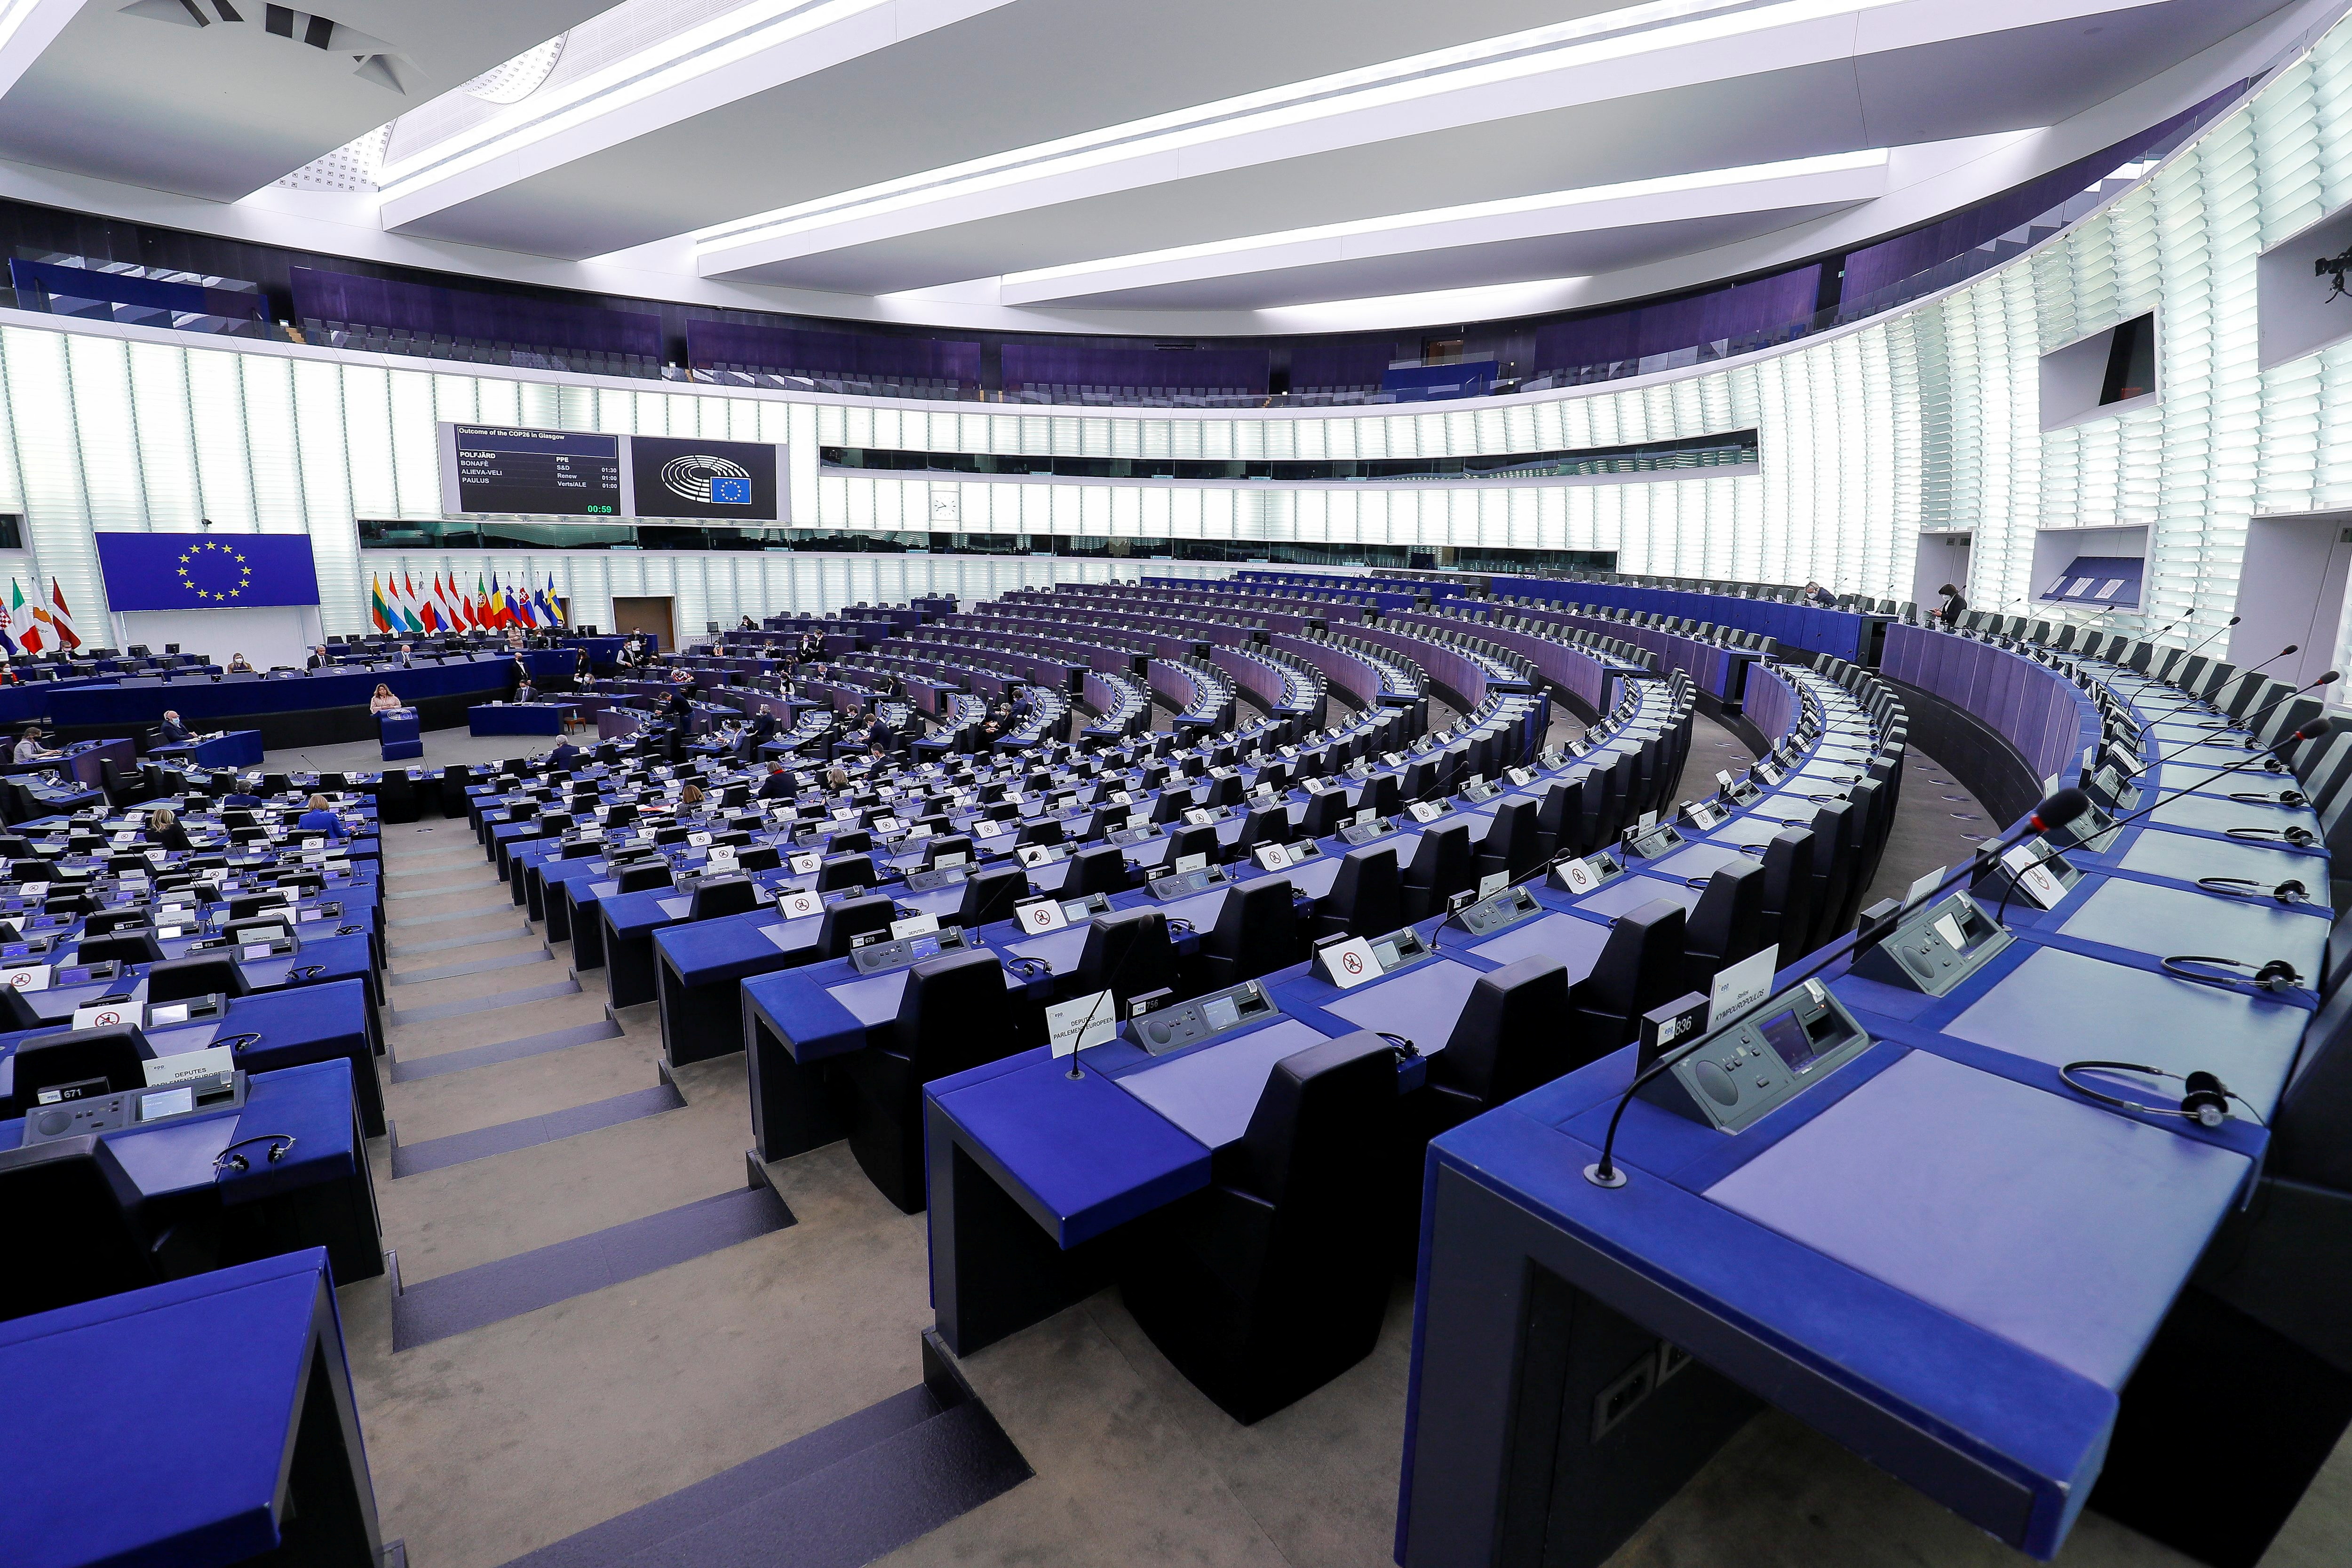 A general view of the hemicycle at the European Parliament in Strasbourg, France, November 24, 2021. Julien Warnand/Pool via REUTERS